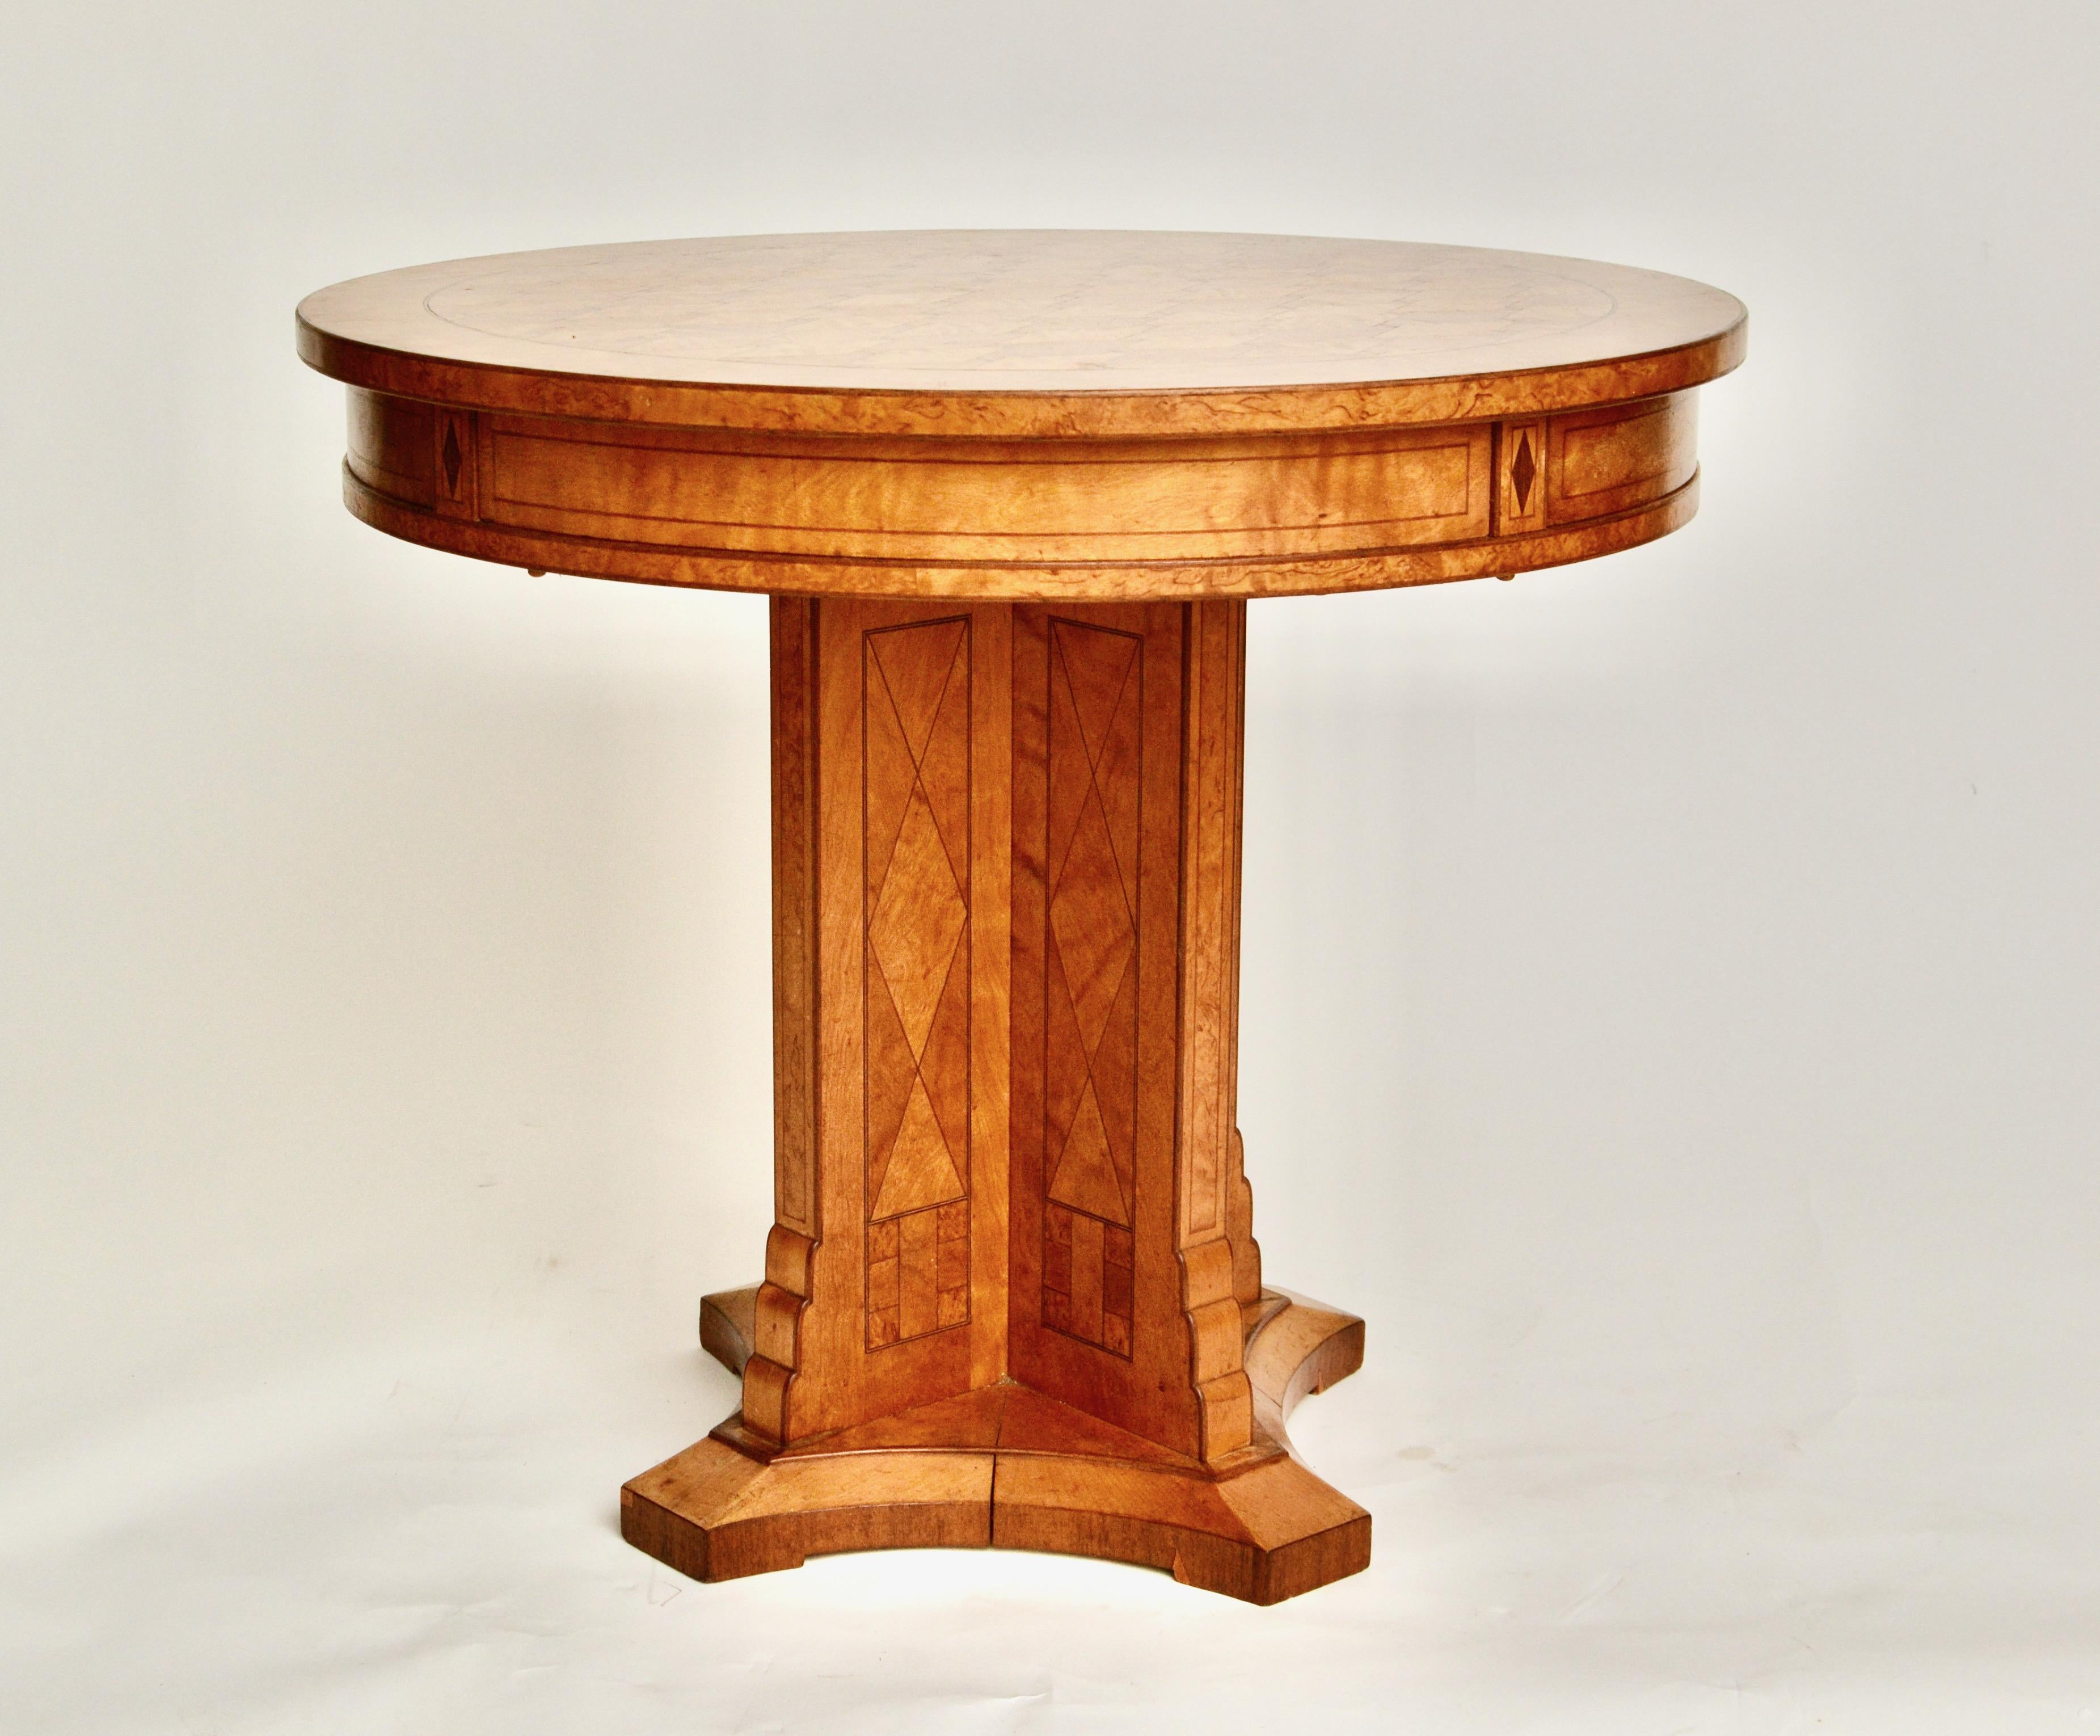 A decorative birch and birch root parquetry gueridon center table. Probably Russian, late 19th century. With four drawers with hidden push button spring release. Very nice color to the surface and the craftsmanship also very good. An unusual model. 